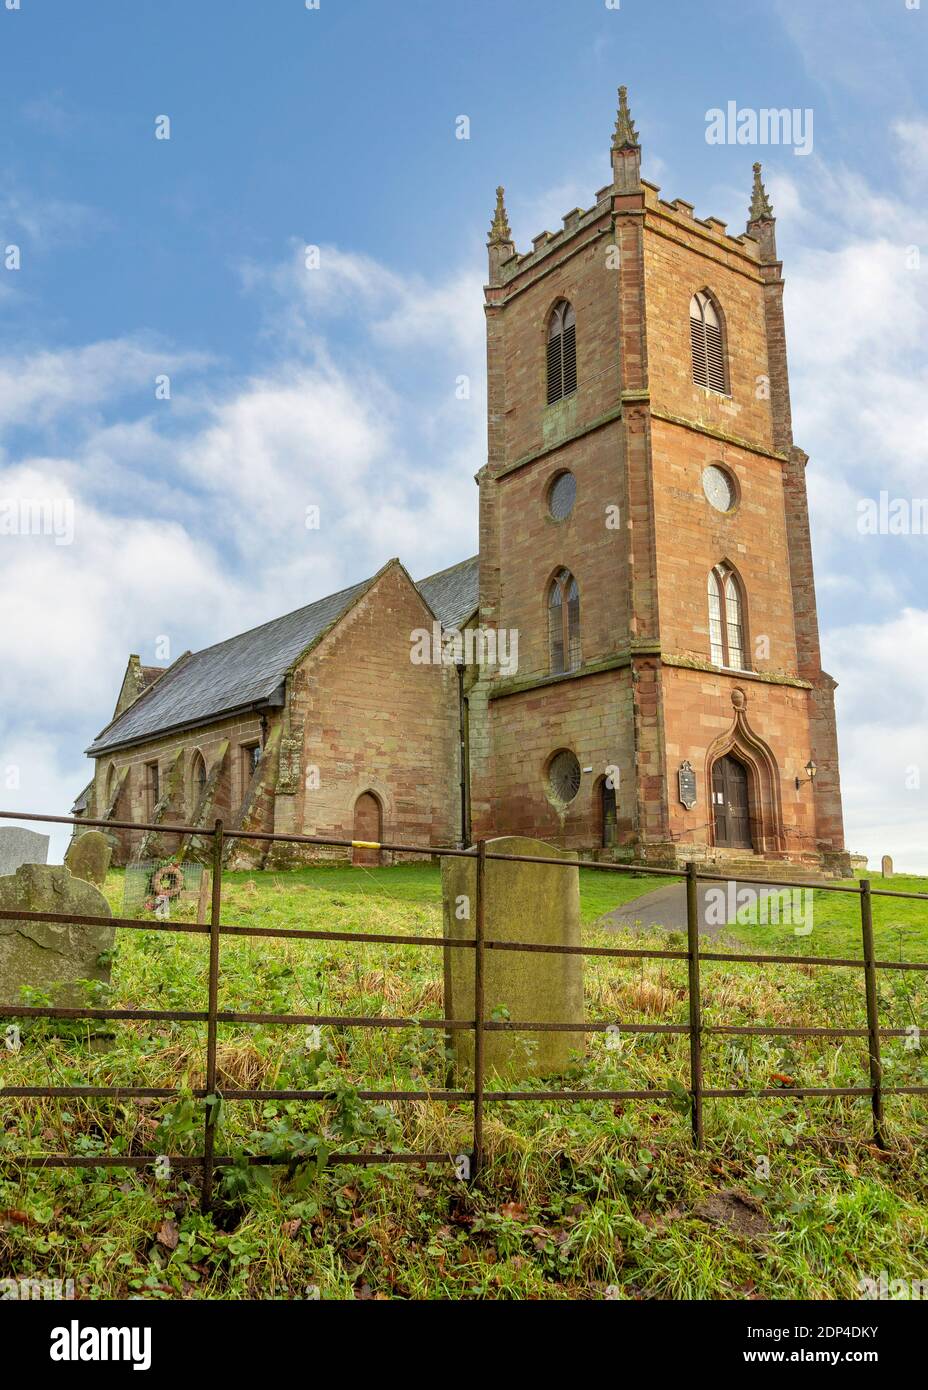 St.Mary The Virgin Church, Hanbury in Worcestershire, England. Stock Photo